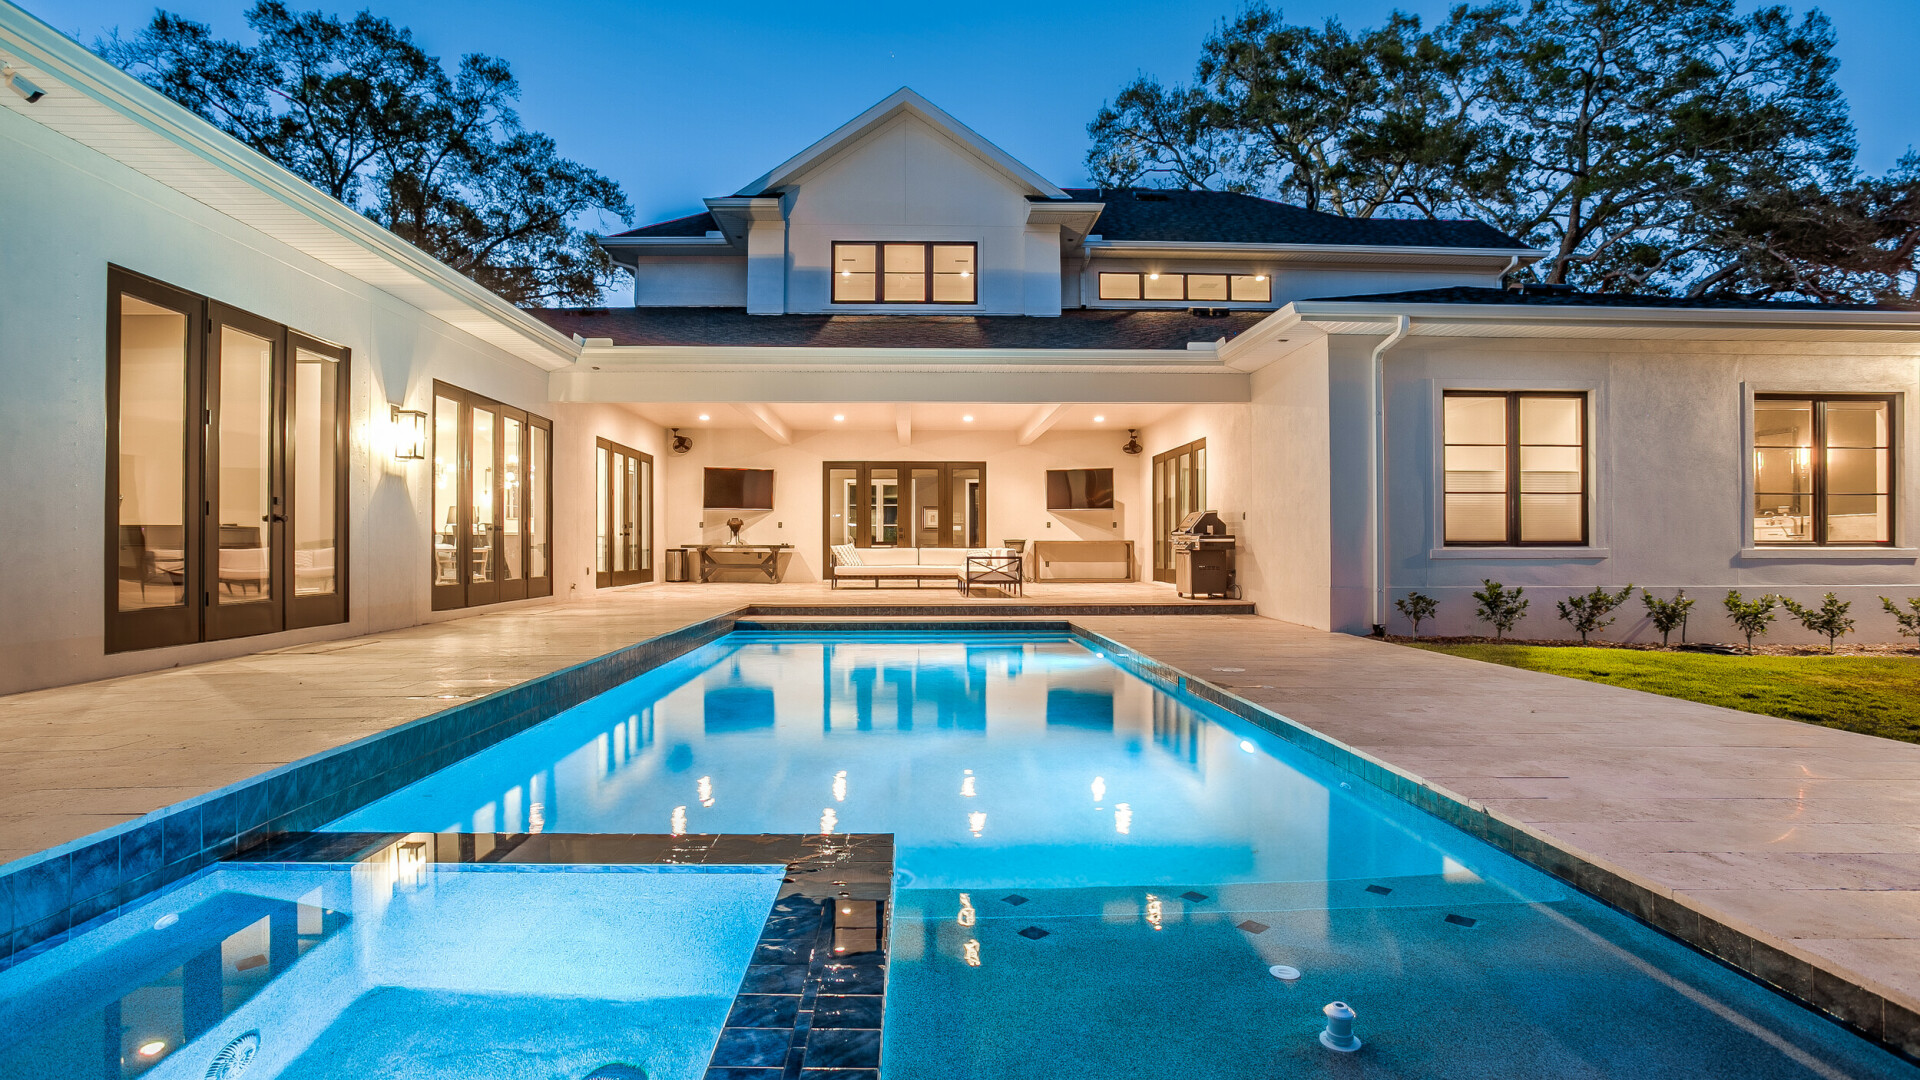 Modern home featuring a large outdoor living space, pool, and hot tub, St. Petersburg FL